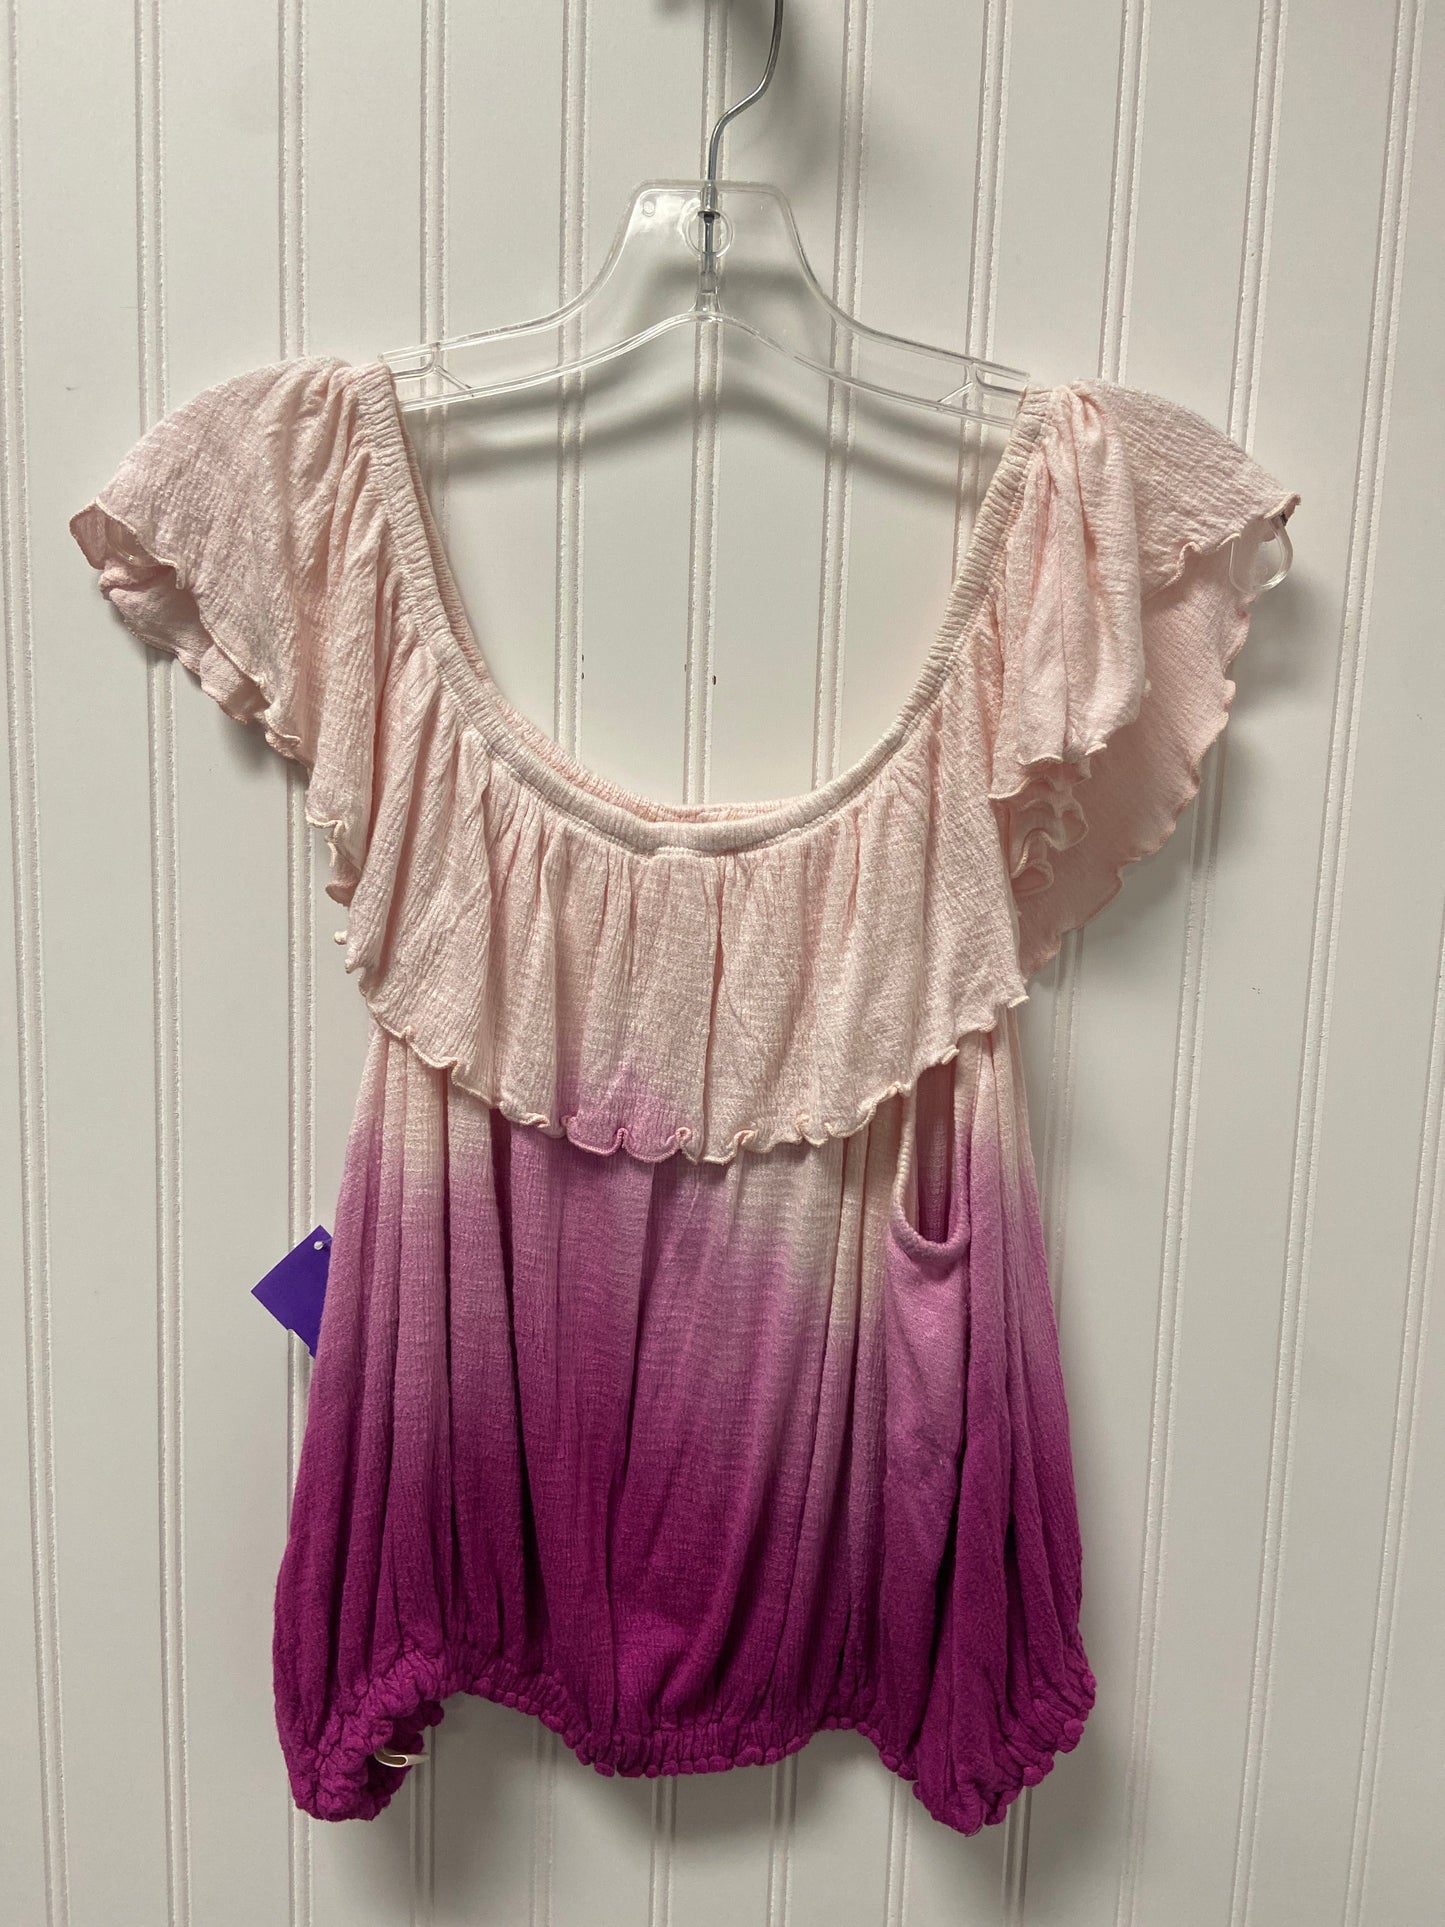 Pink & Purple Top Short Sleeve Free People, Size Xs